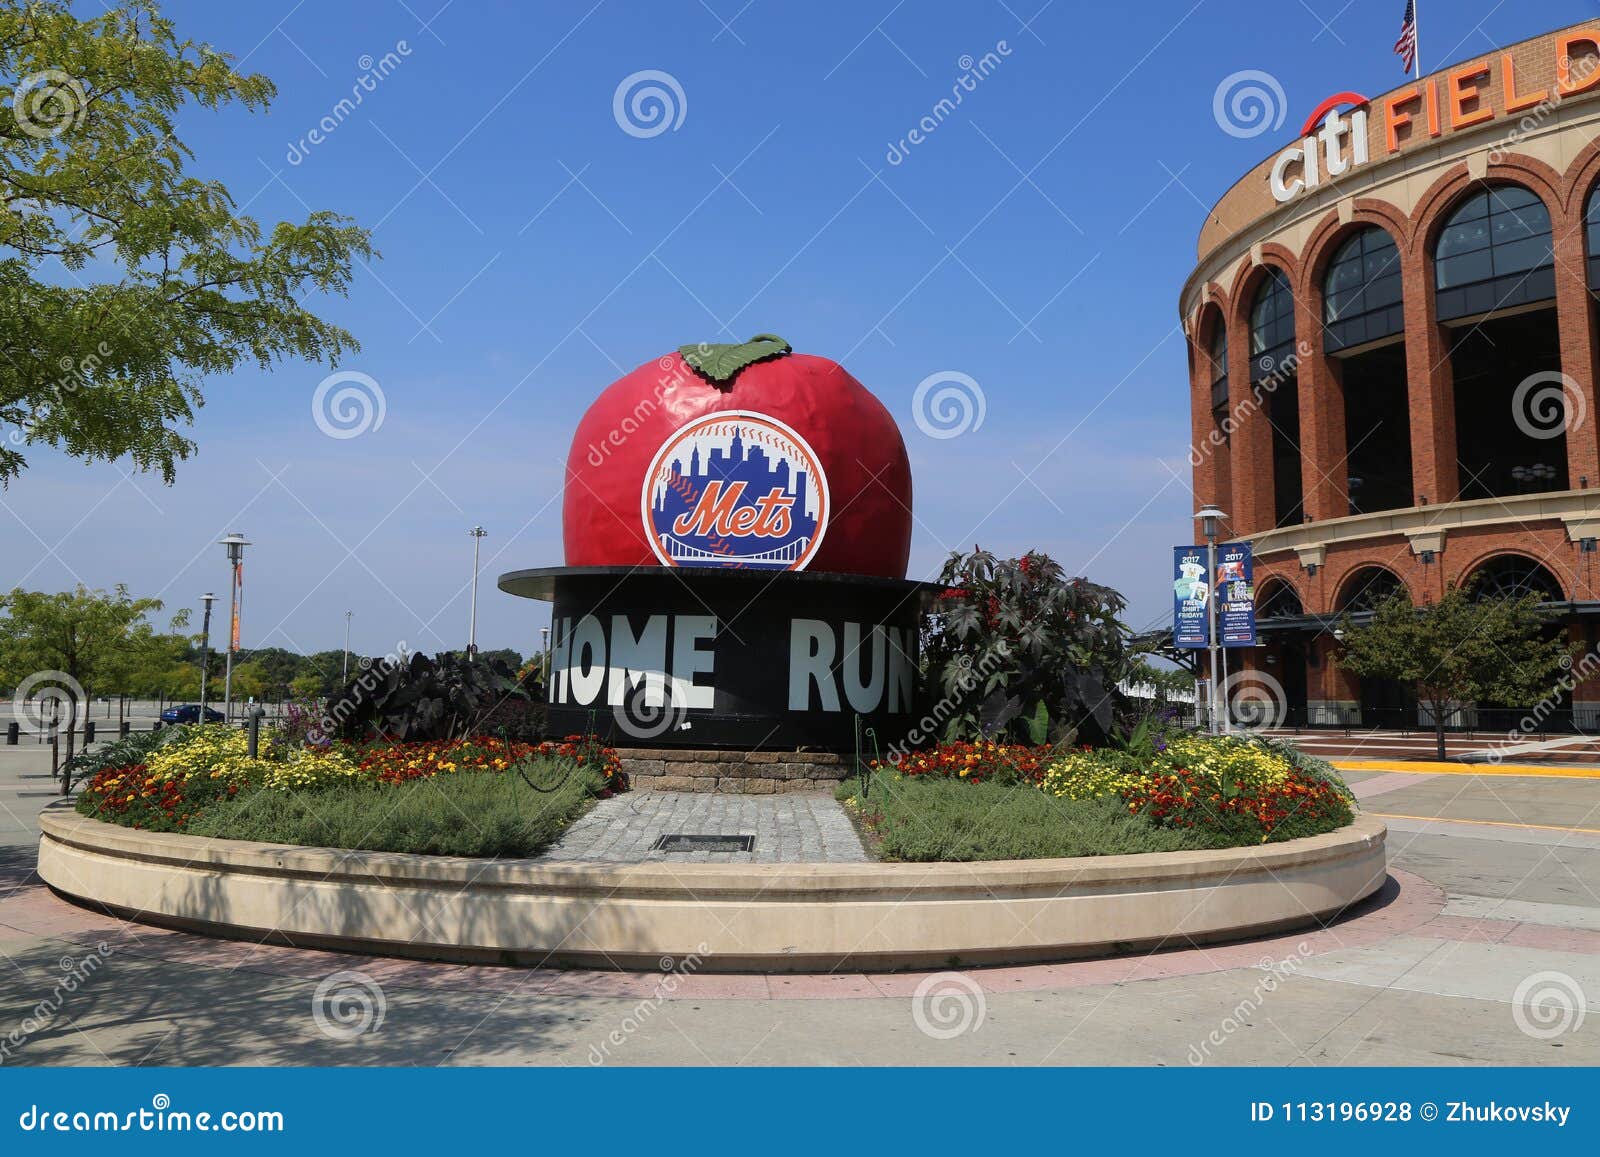 Citi Field: Home of the Mets